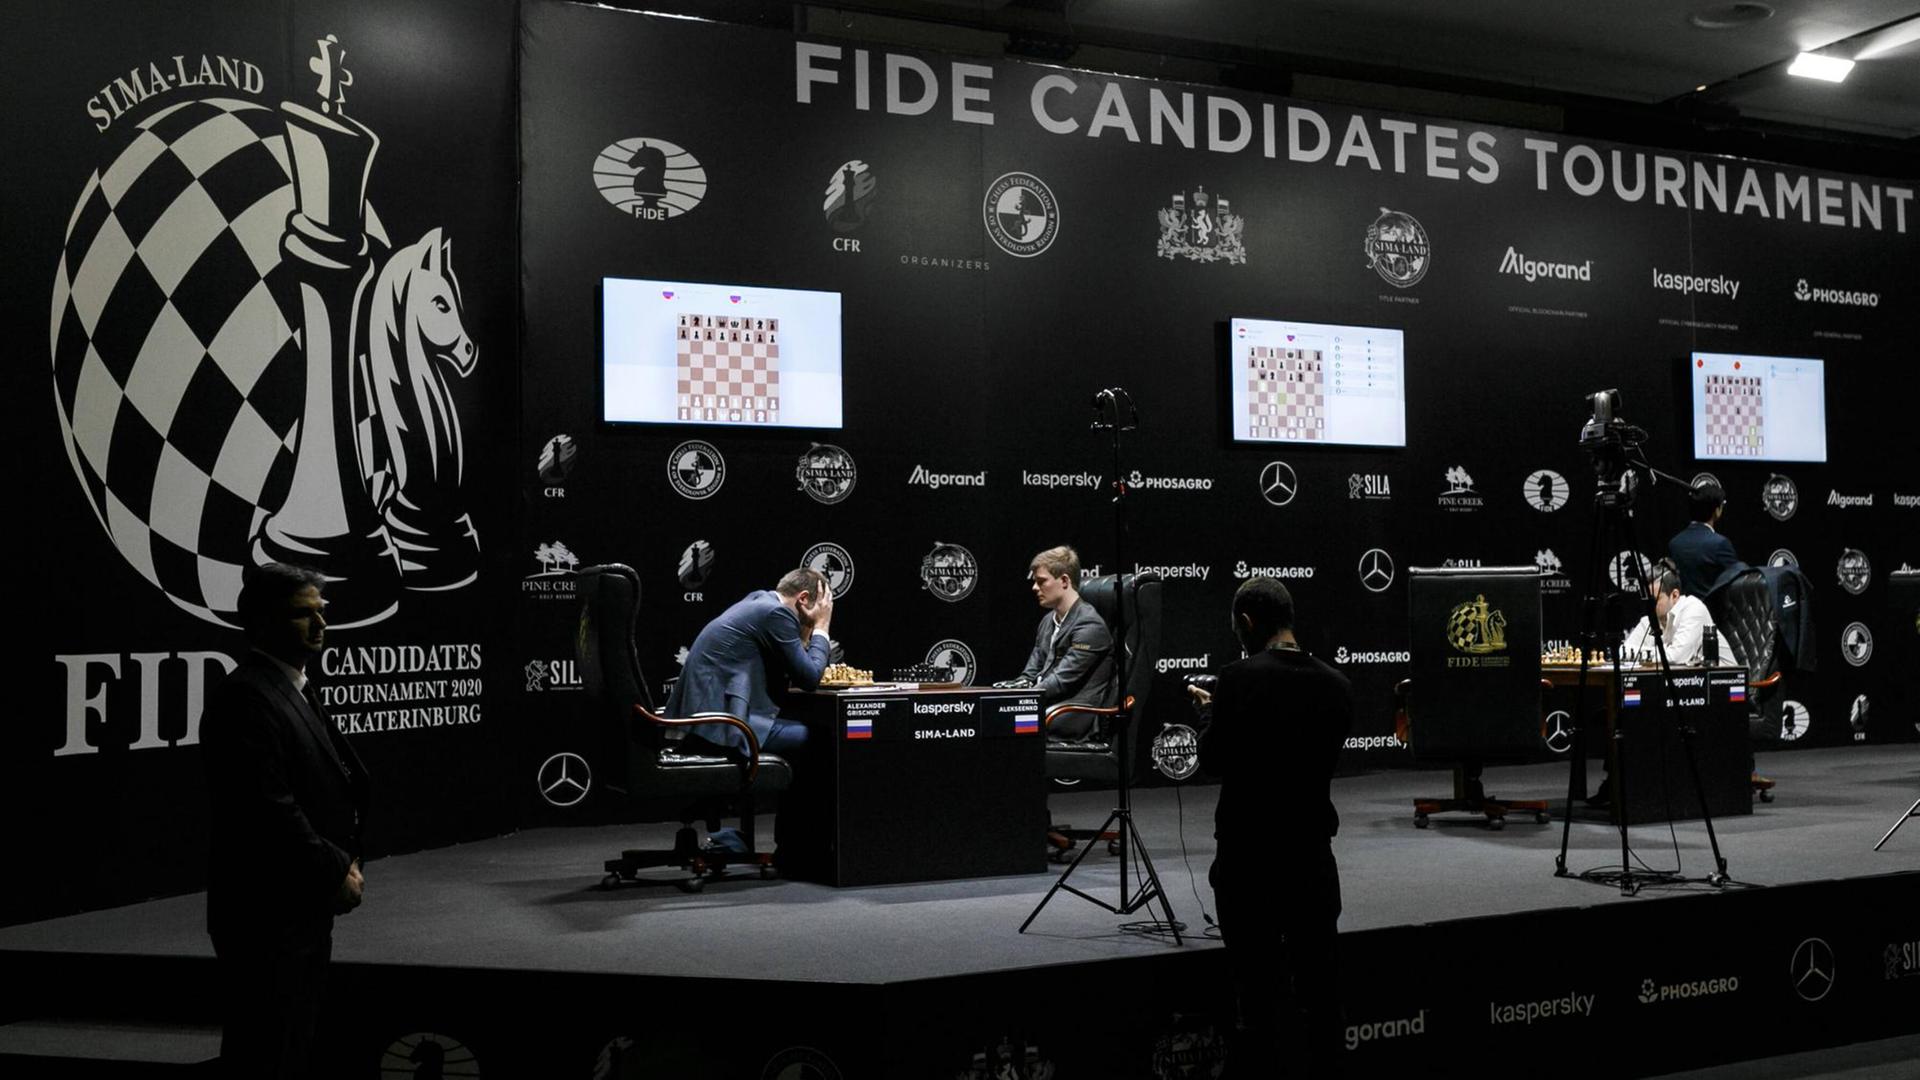 YEKATERINBURG, RUSSIA - MARCH 17, 2020: Participants in the 2020 FIDE Candidates chess tournament at the Hyatt Regency Ekaterinburg Hotel. The event is to determine who will challenge Magnus Carlsen for the title of the World Chess Champion. The event is held behind closed doors due to the coronavirus pandemic. Alexei Kolchin/TASS PUBLICATIONxINxGERxAUTxONLY TS0D282B